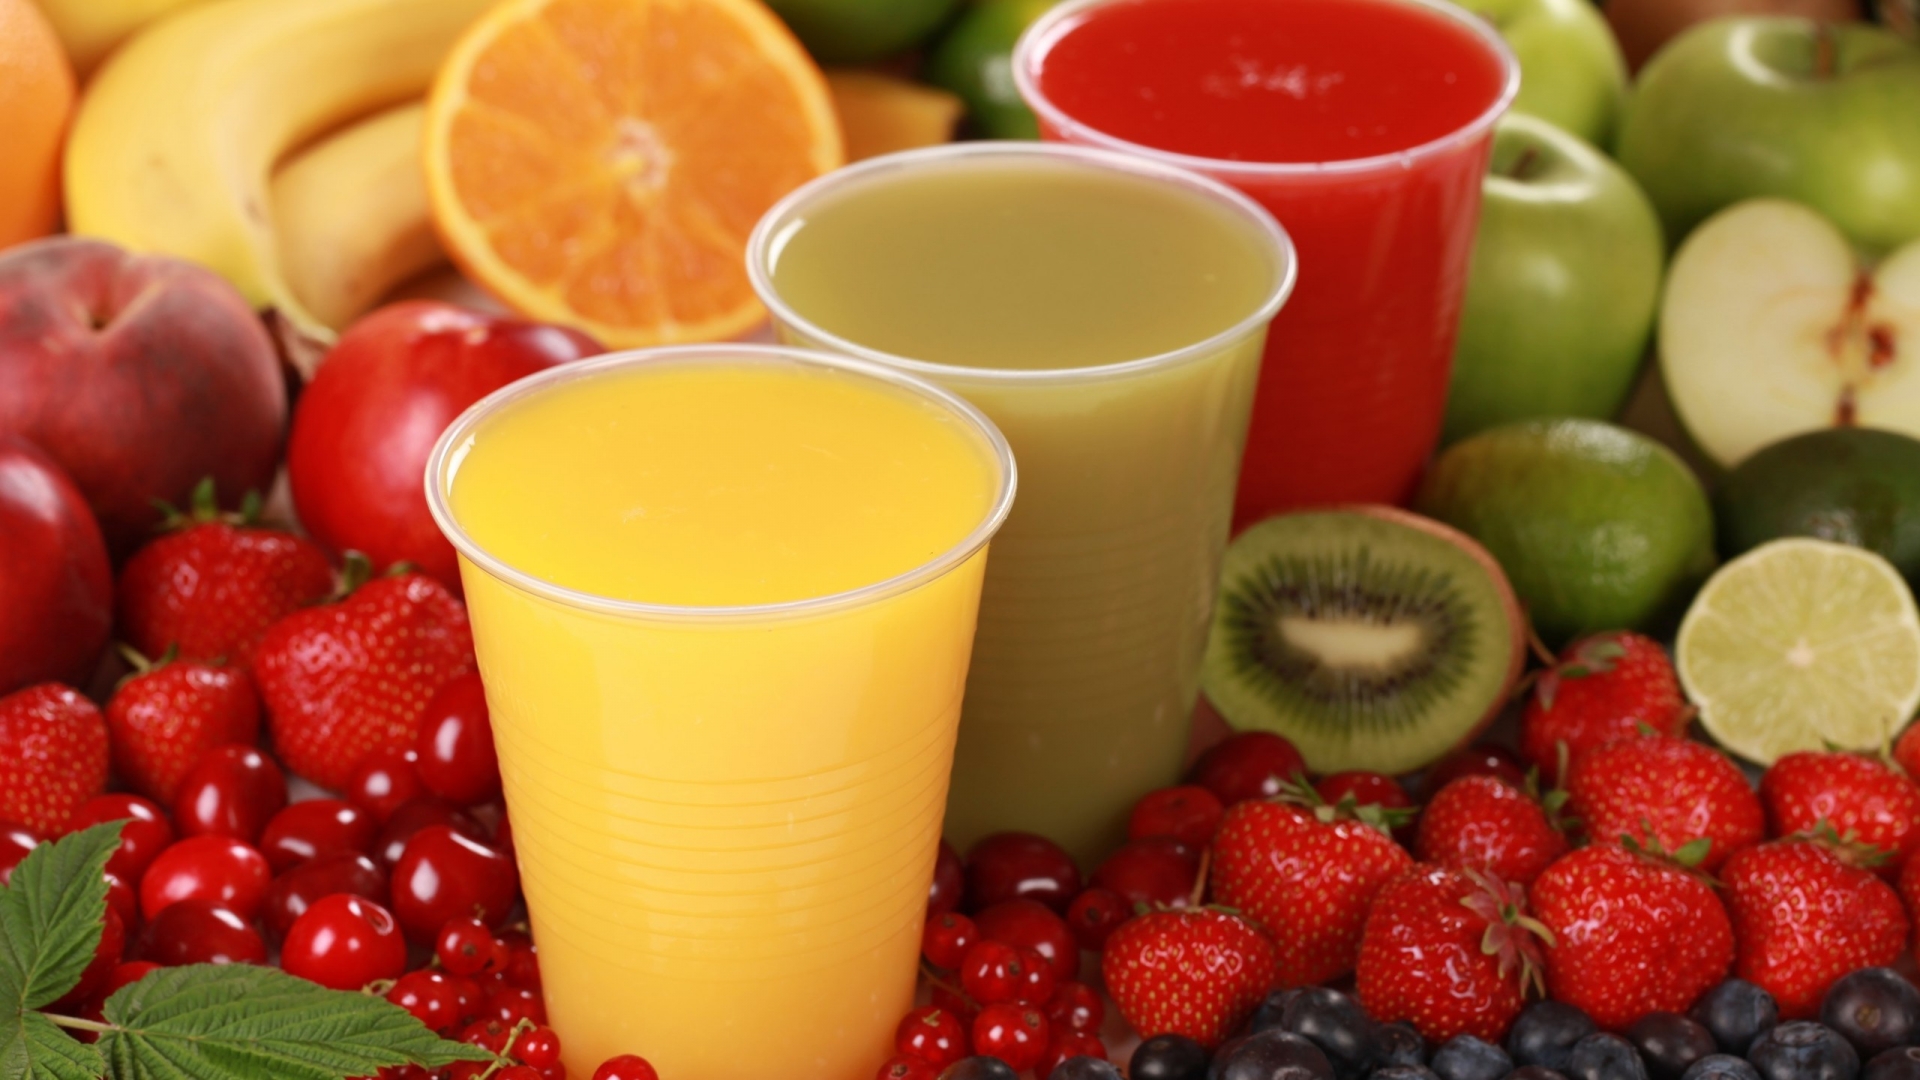 Fruits Juices for 1920 x 1080 HDTV 1080p resolution